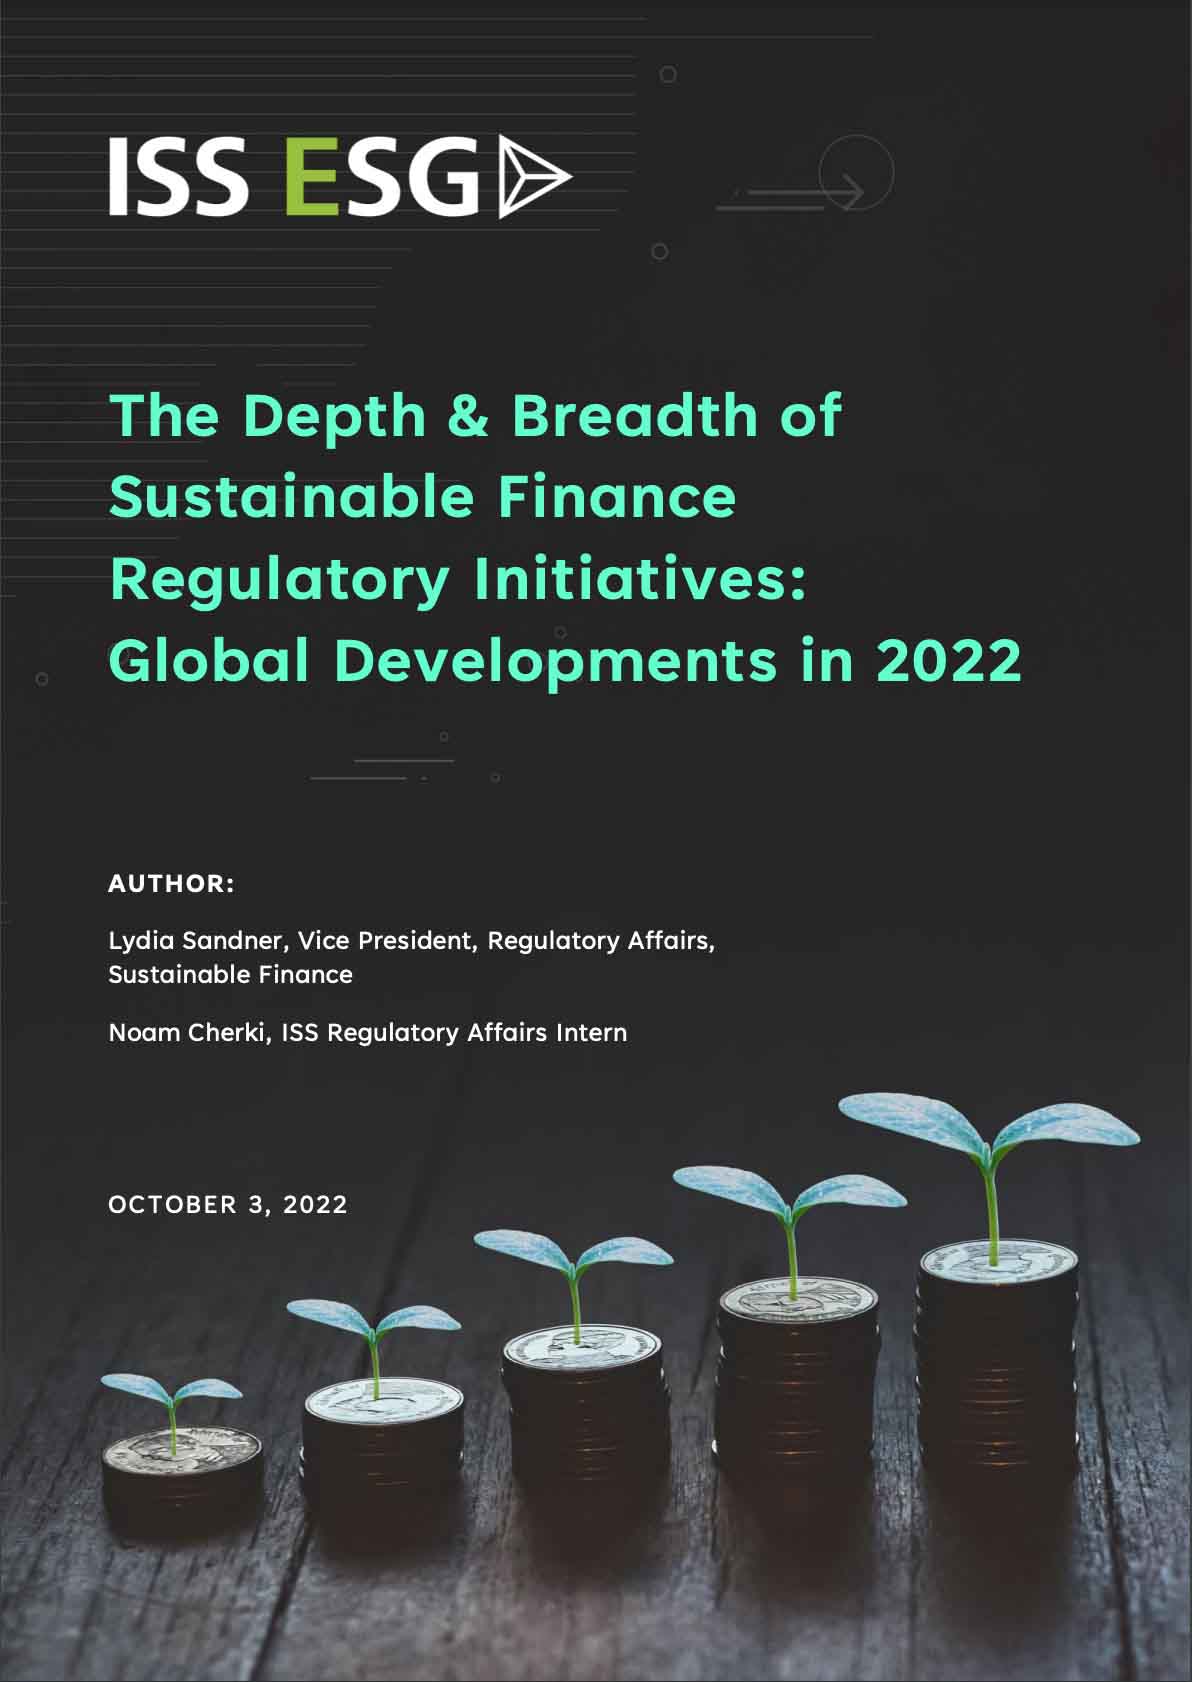 The Depth & Breadth of Sustainable Finance Regulatory Initiatives: Global Developments in 2022